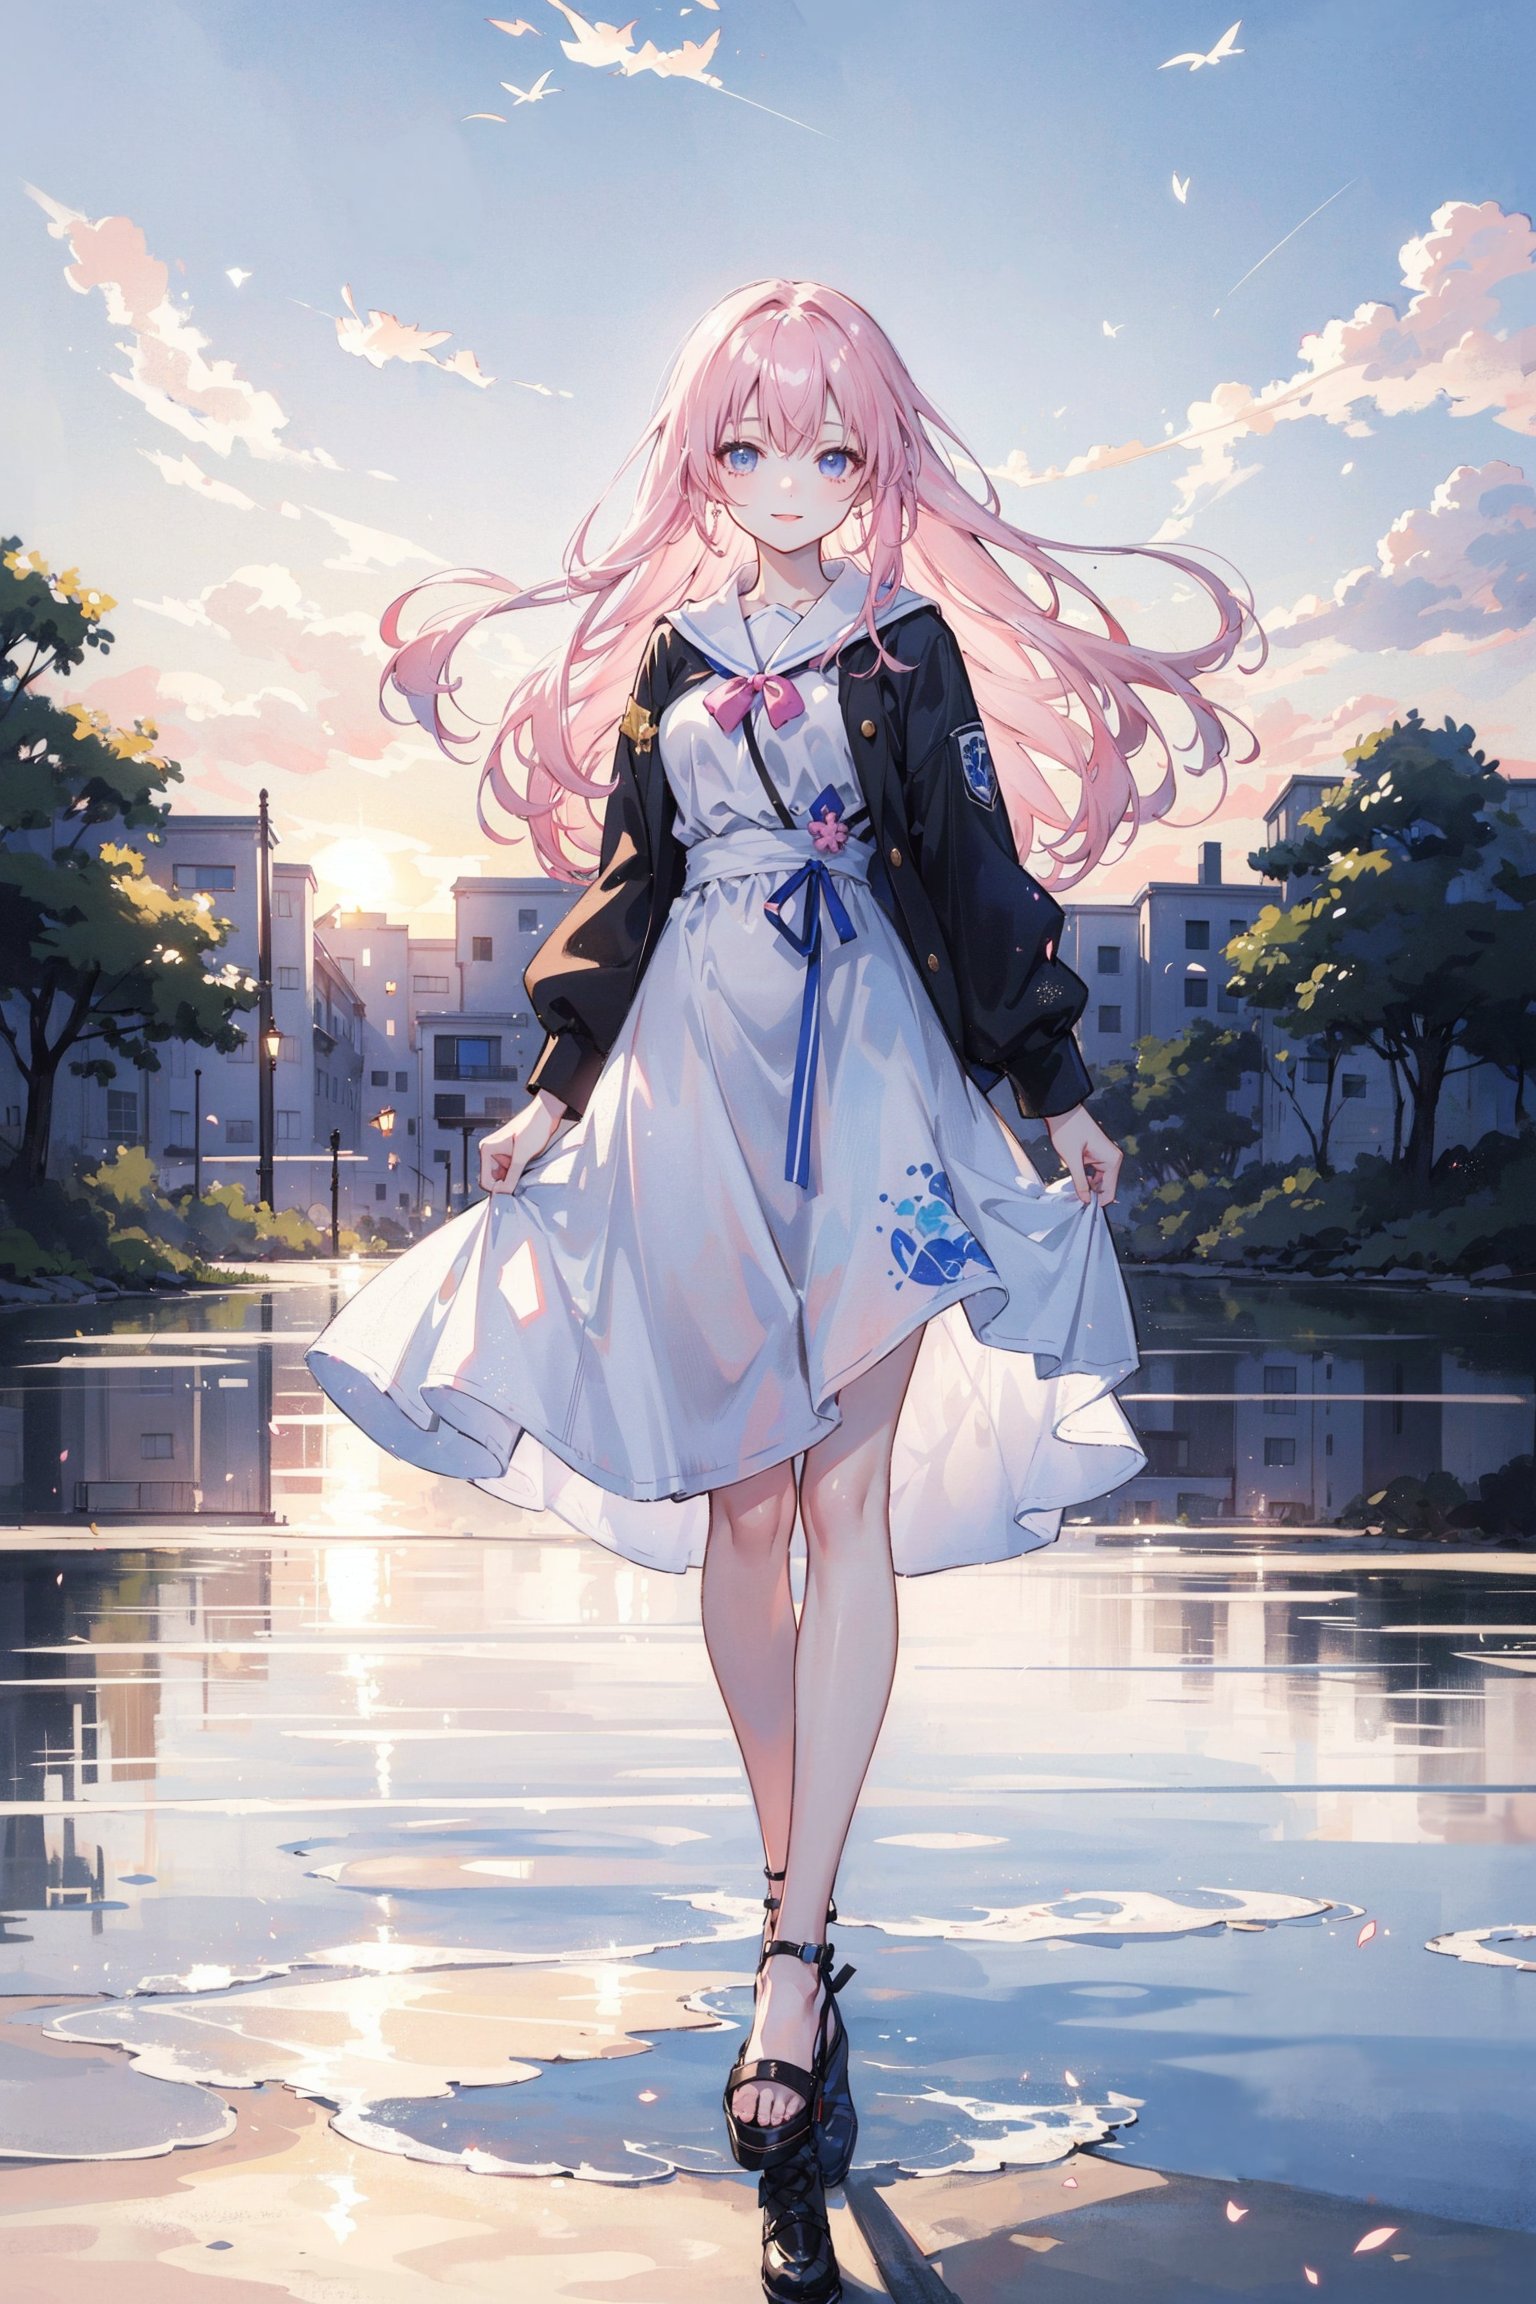 Young cute girl、High and tall,Perfect Curve,Exquisite and straight facial features,（（（Campus style）））、Light pink hair、Silky long hair,masterpiece、Top image quality、Top quality、Wear JK,dusk sunset,Beautiful composition,Slender,White,a happy expression,（artist painting,Works by Makoto Shinkai）,Full body portrait,Depth of Field,
